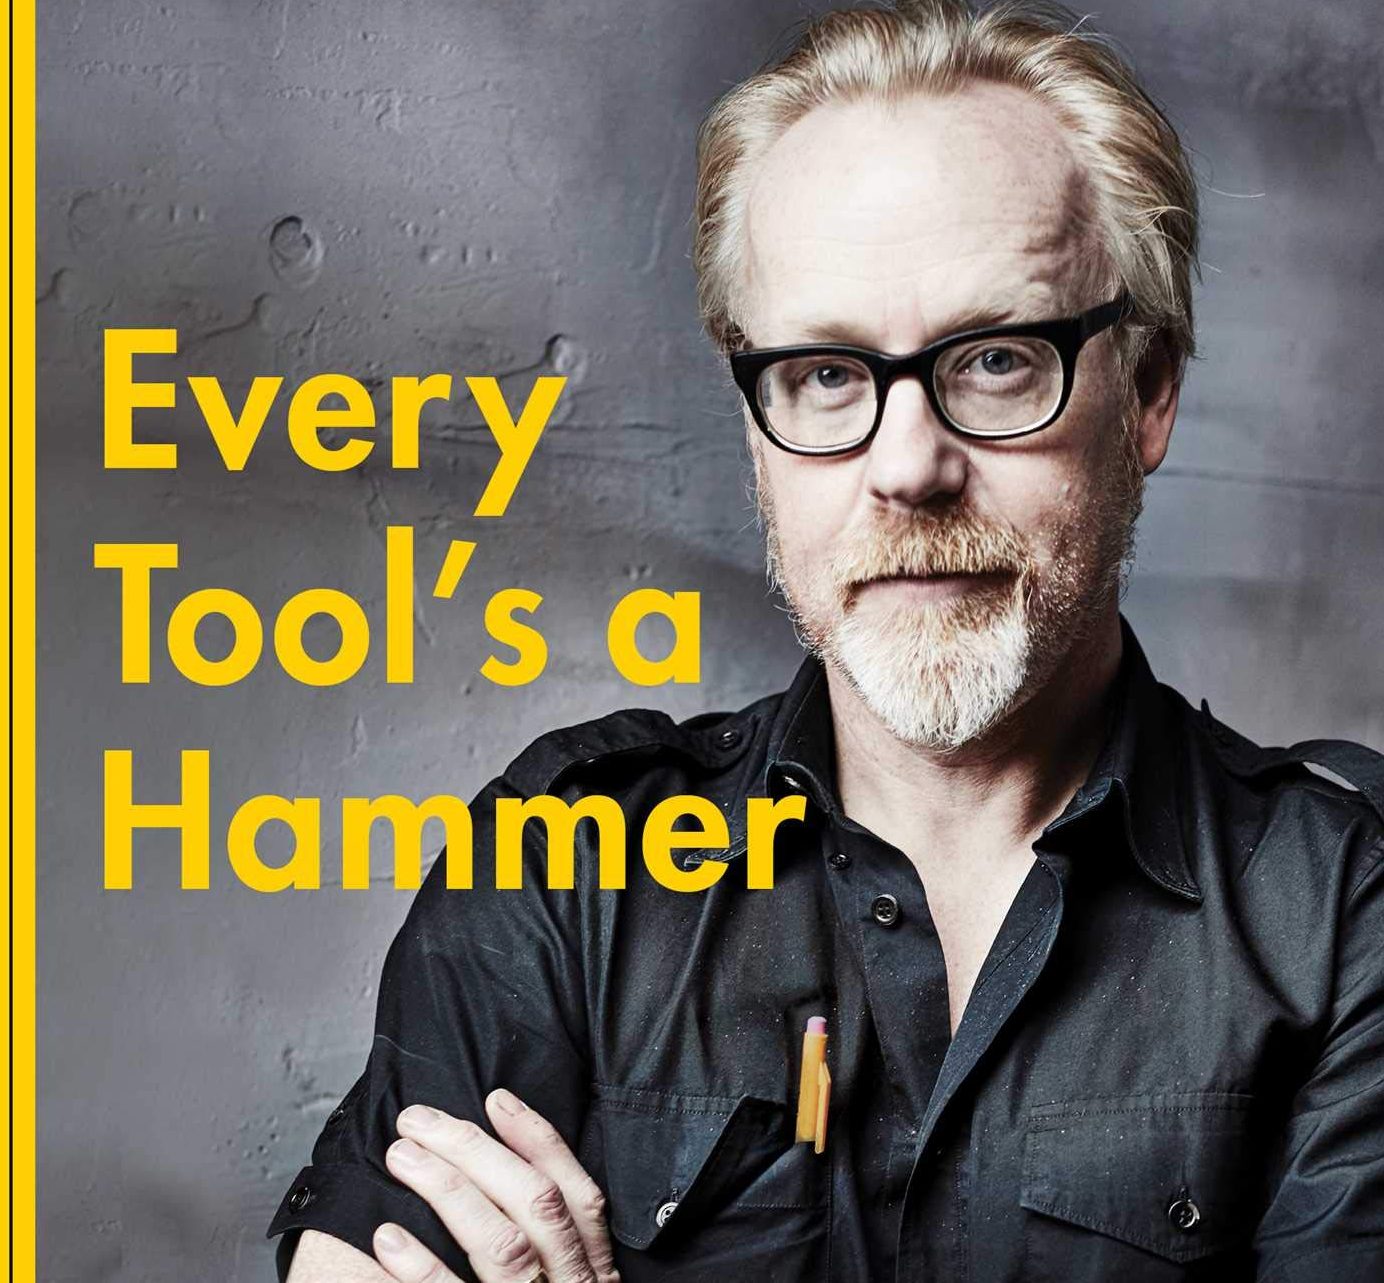 Adam Savage takes a big swing with new book, 'Every Tool's a Hammer: Life is What You Make It'